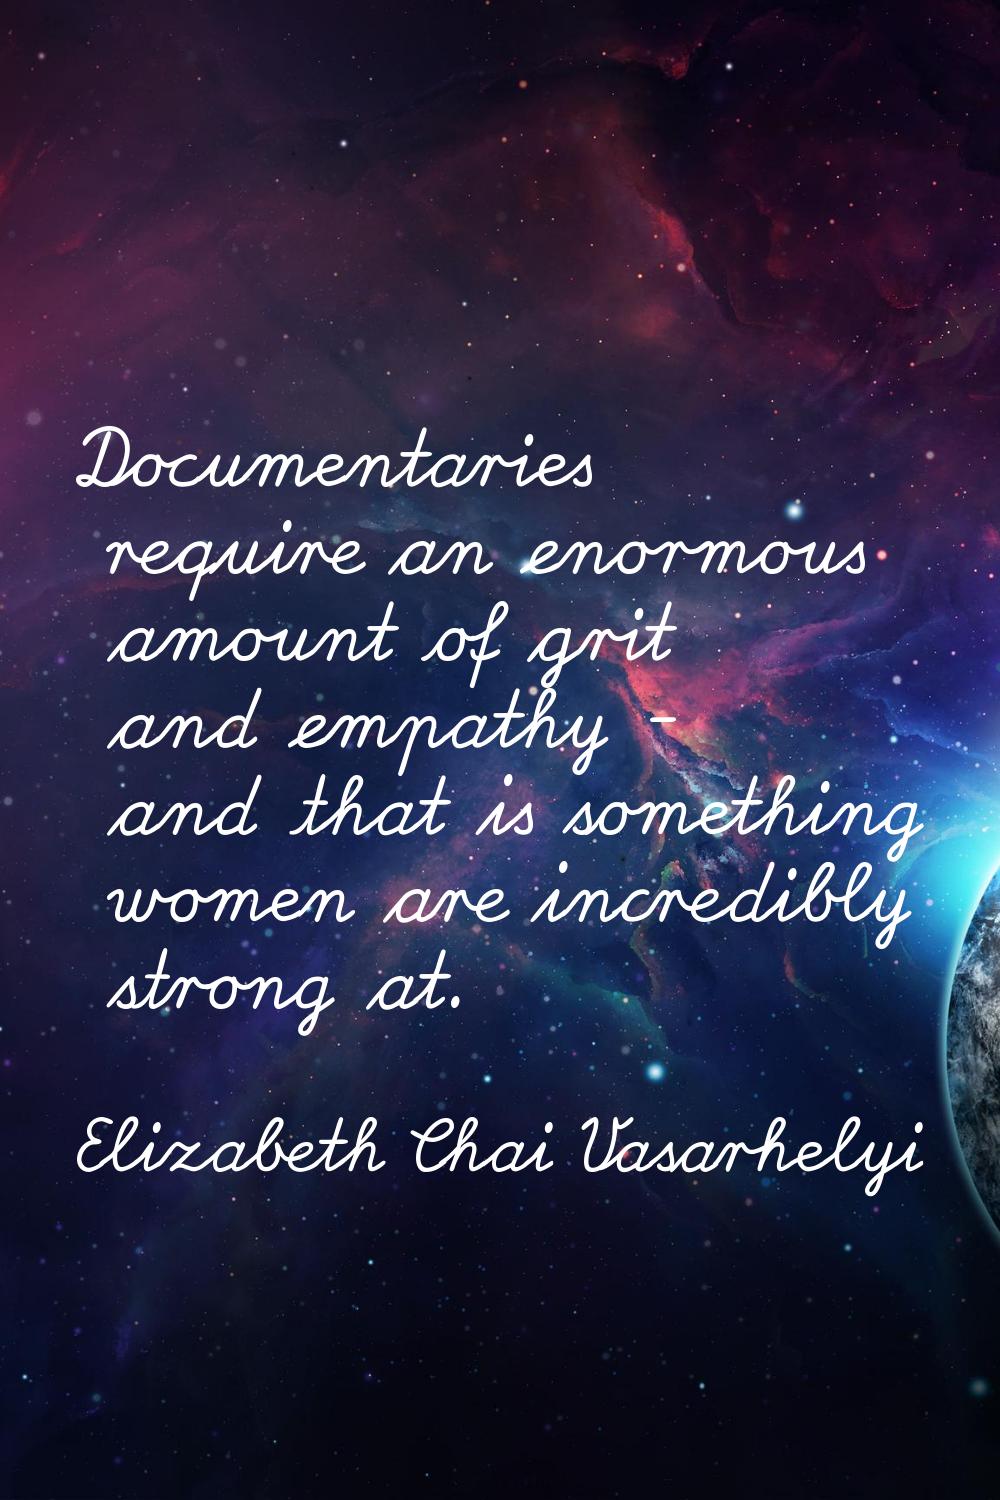 Documentaries require an enormous amount of grit and empathy - and that is something women are incr